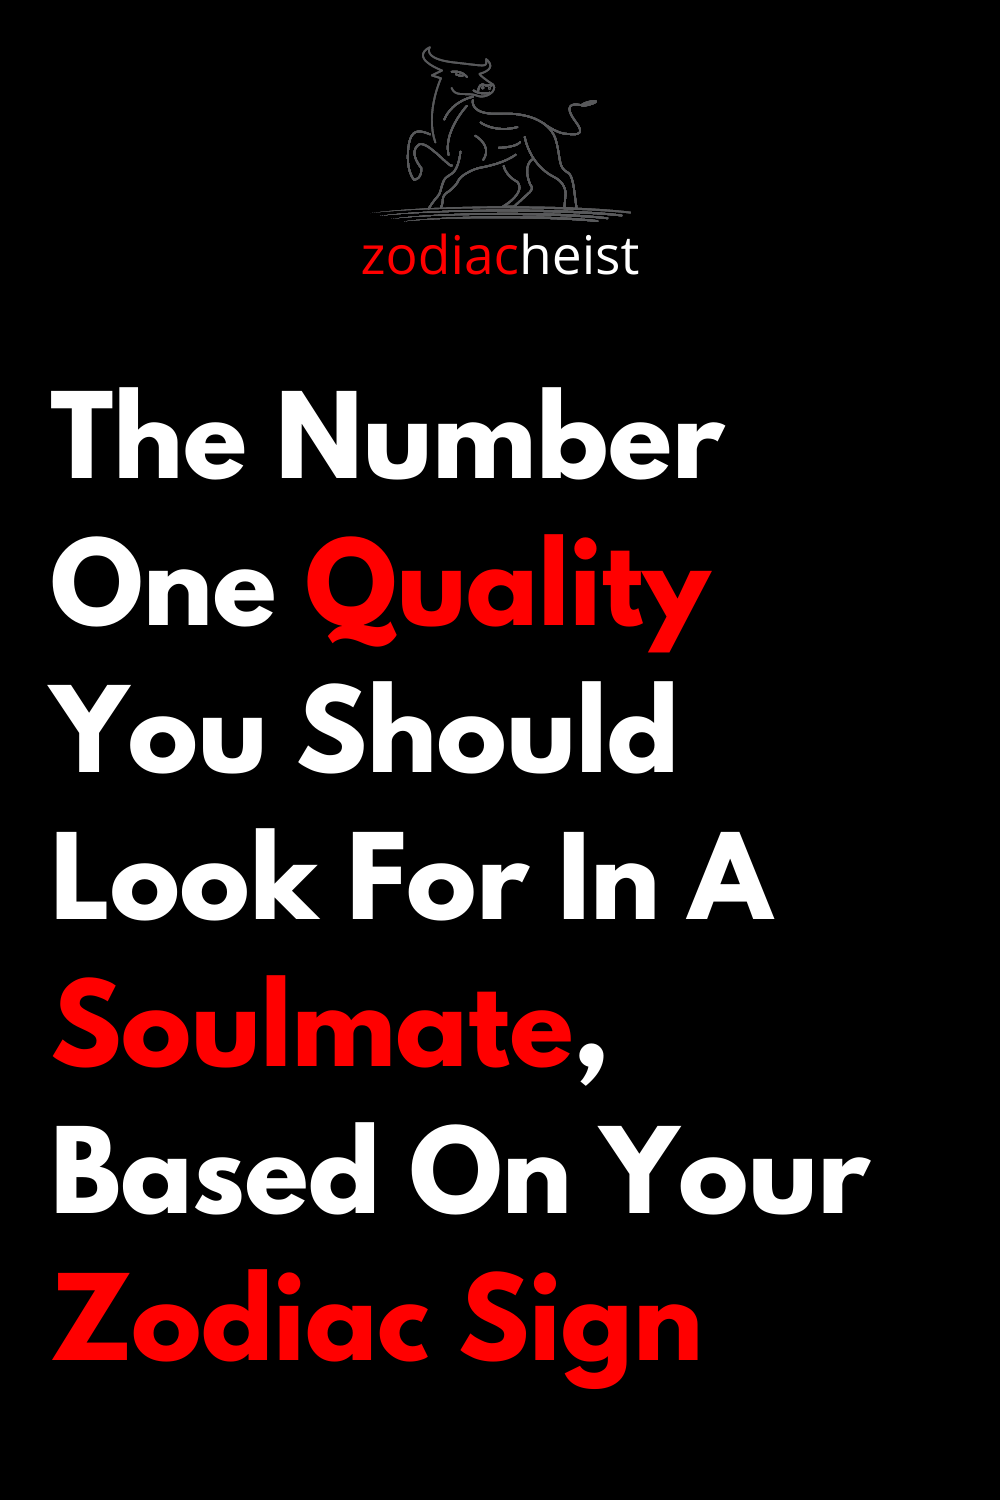 The Number One Quality You Should Look For In A Soulmate, Based On Your Zodiac Sign